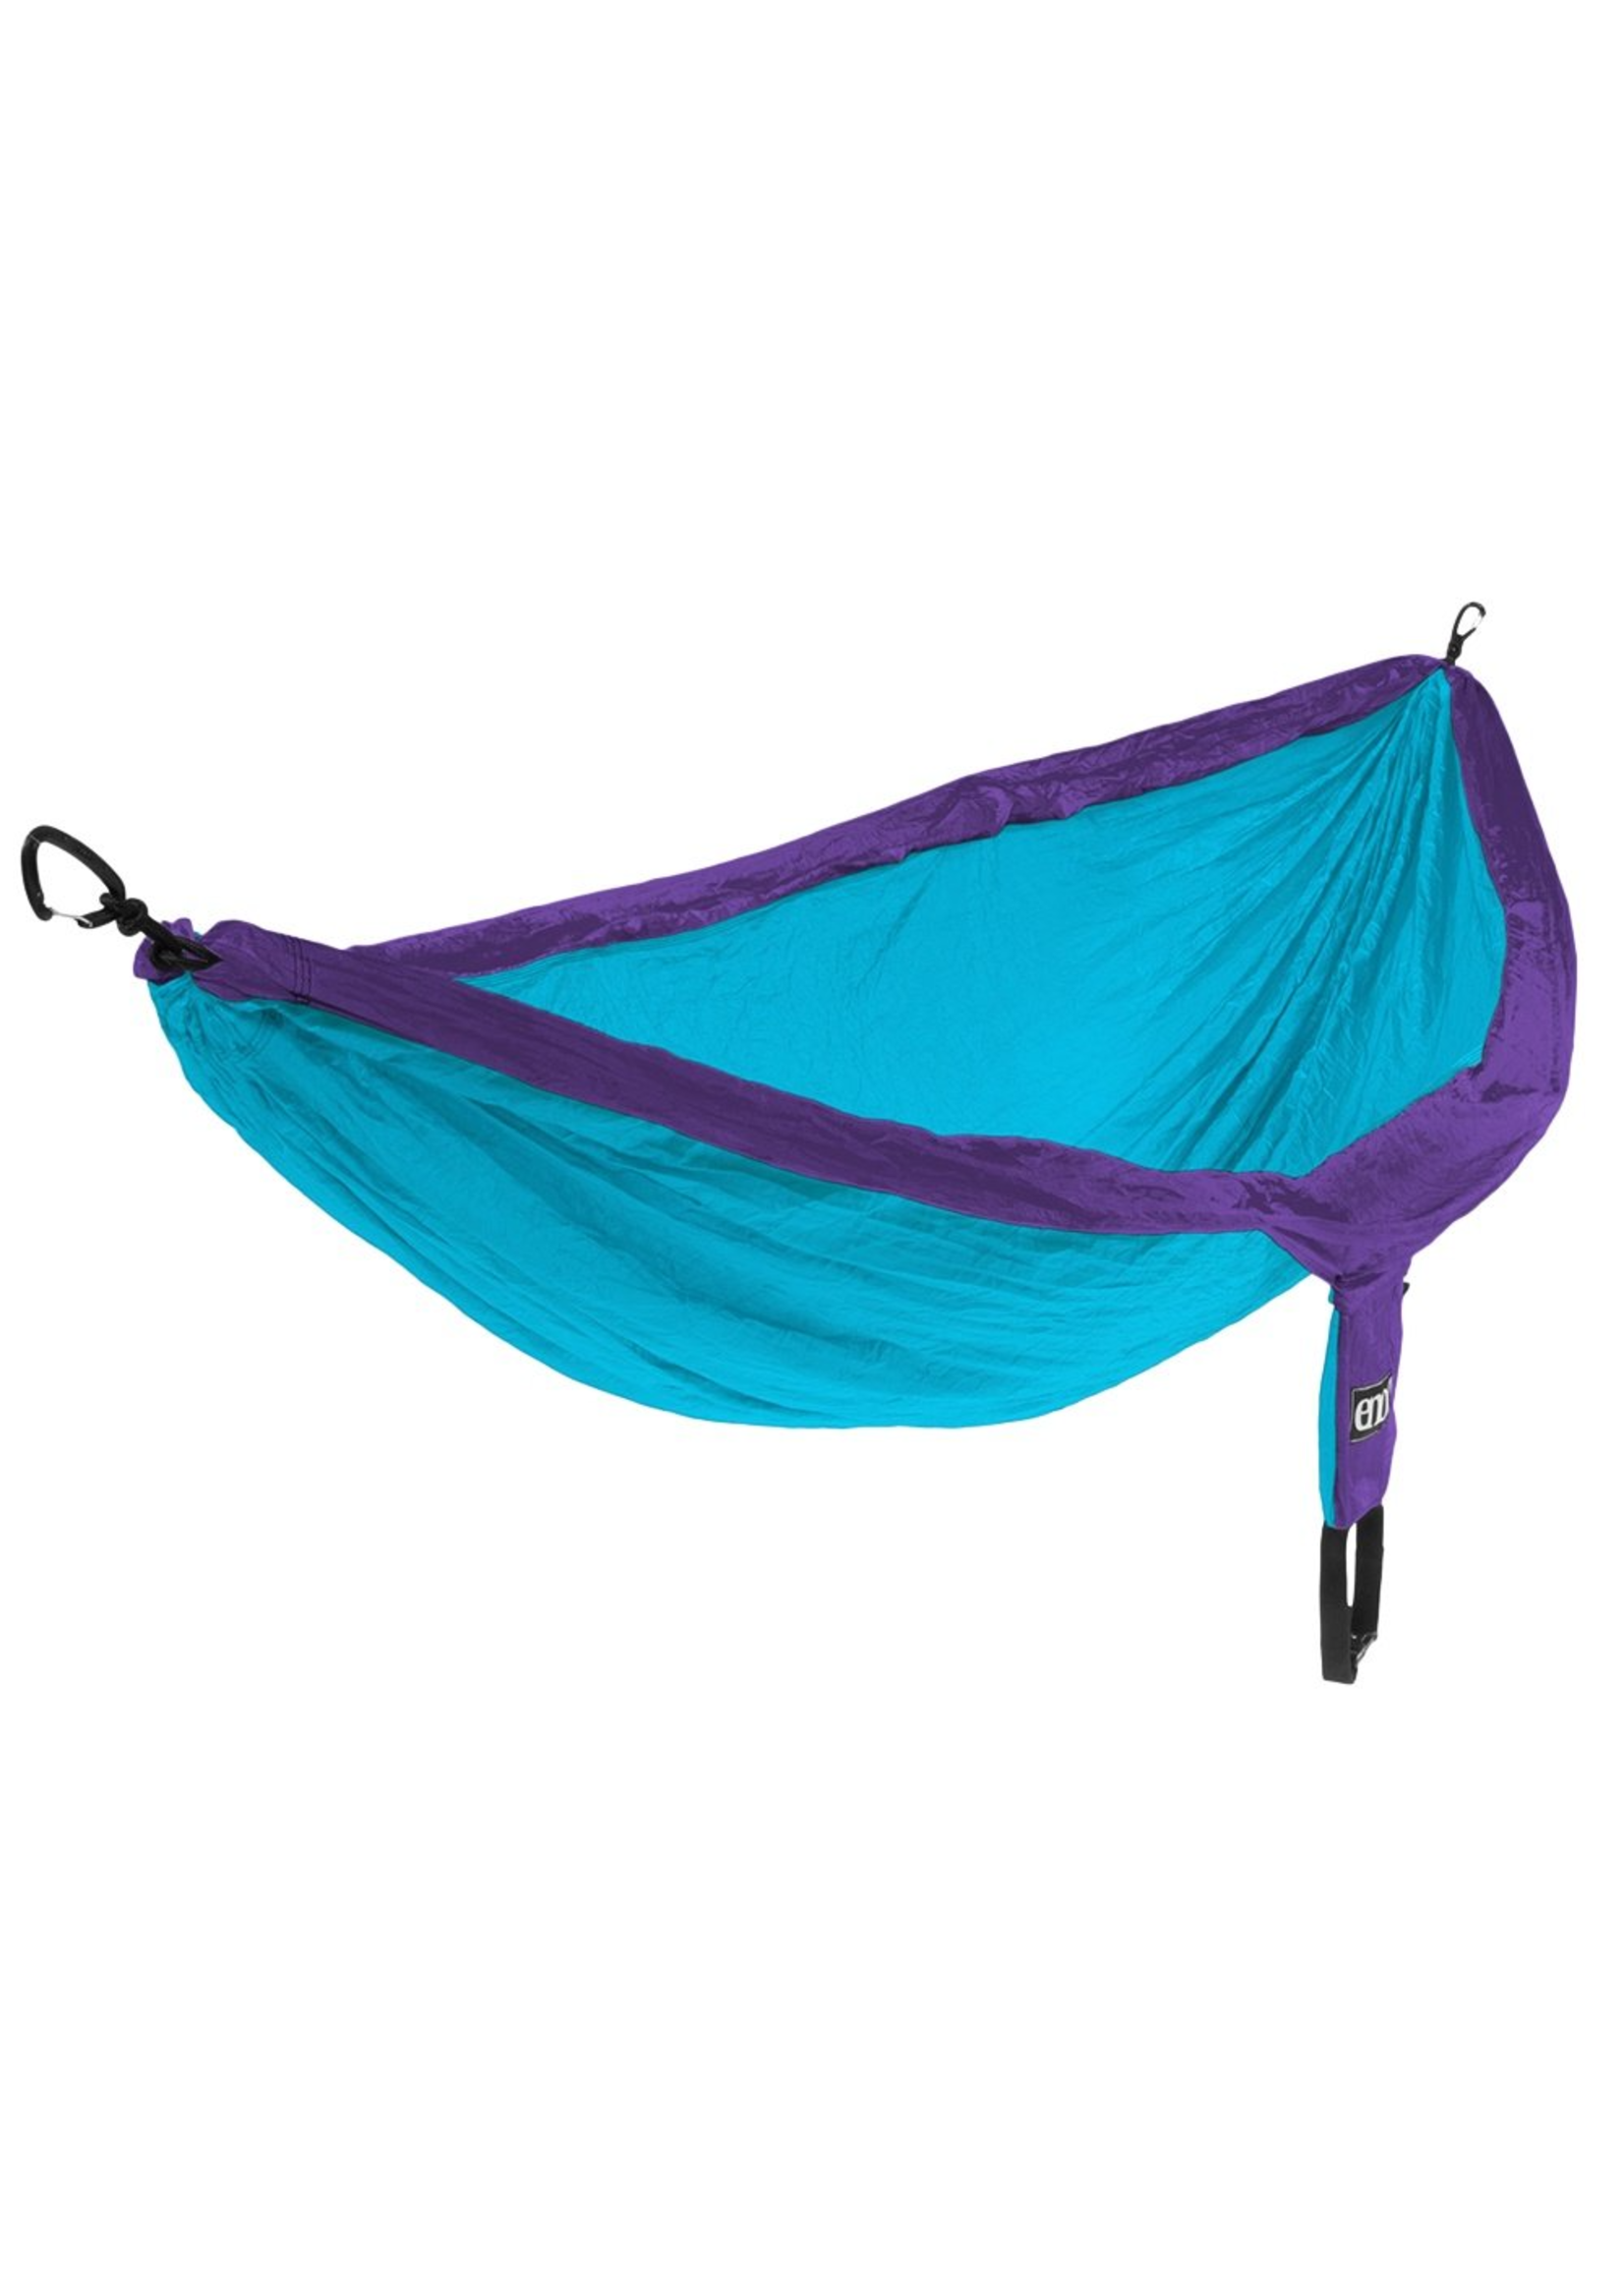 ENO- Eagles Nest Outfitters DoubleNest Hammock Purple / Teal